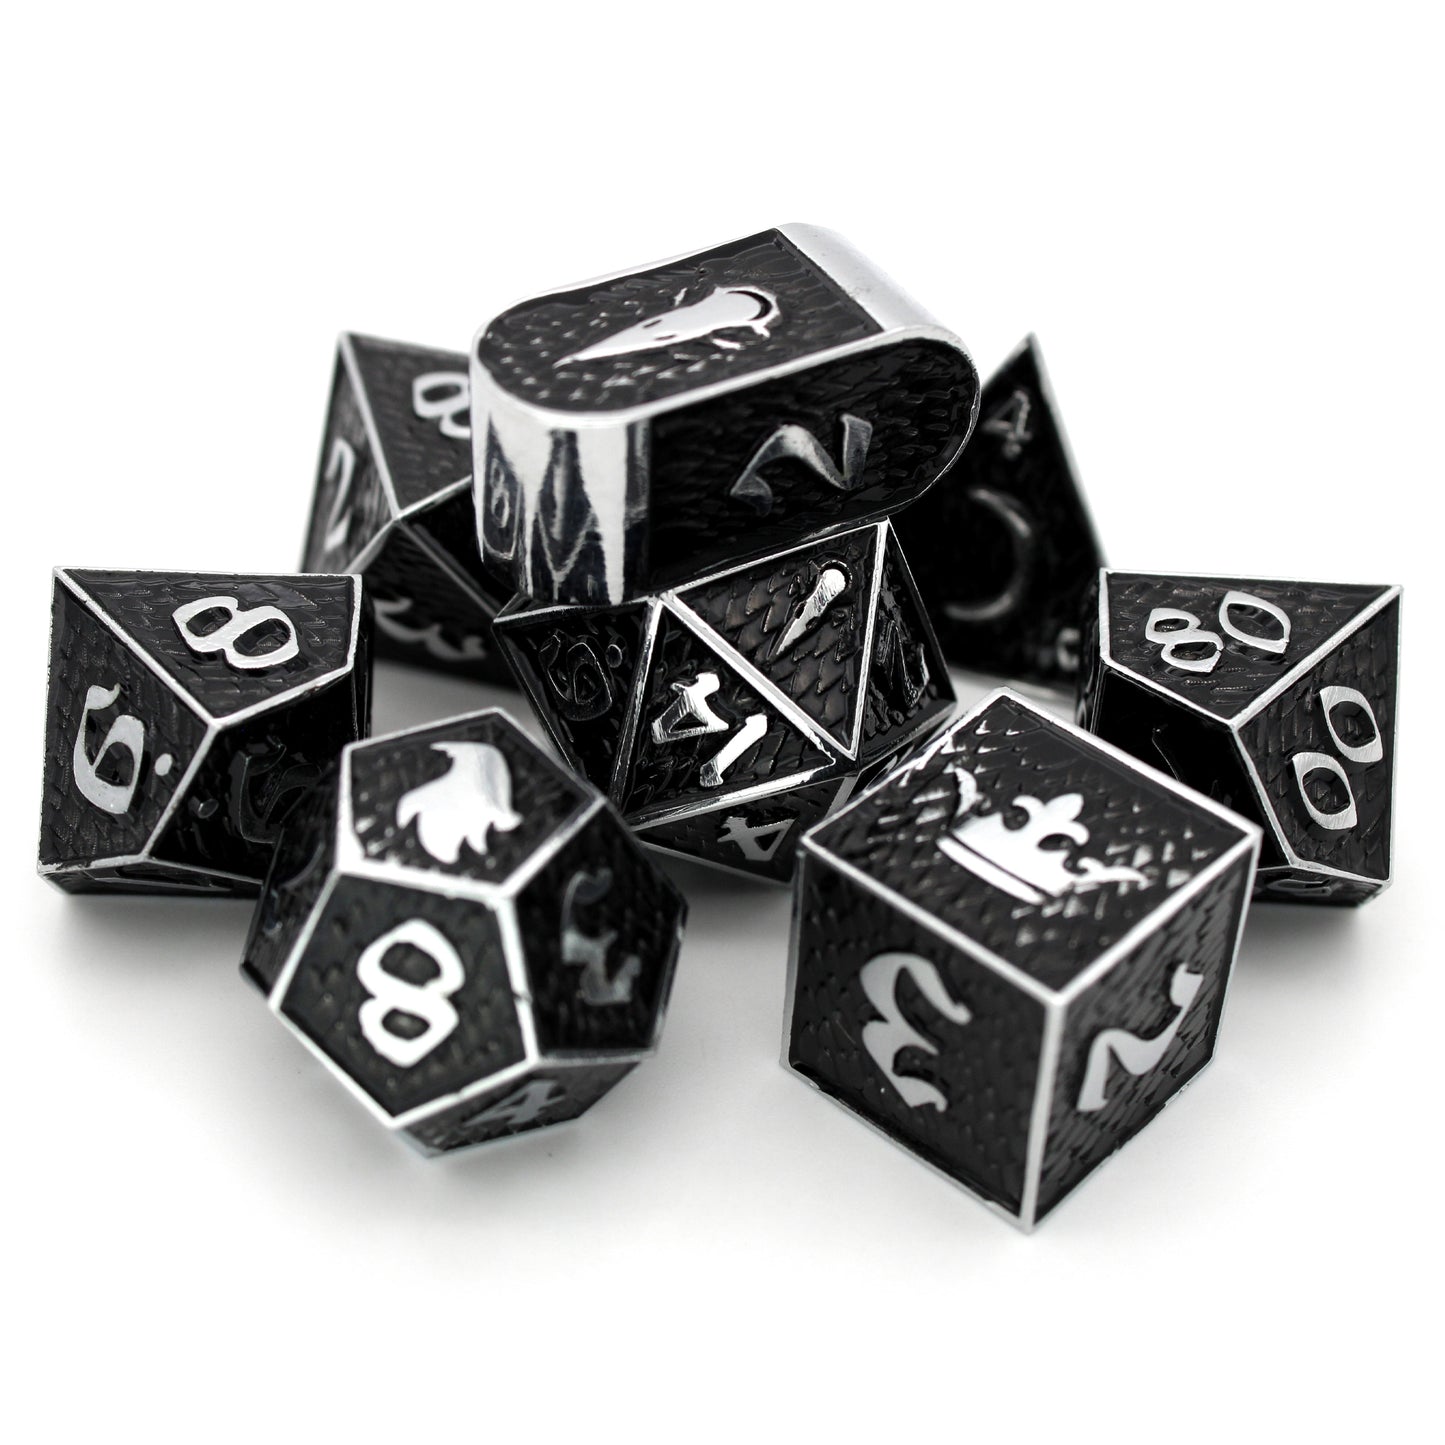 Shadowfell is an 8-piece Dice Envy Exclusive set of silver metal dice featuring raven imagery, cloaked in shadowy black ink.